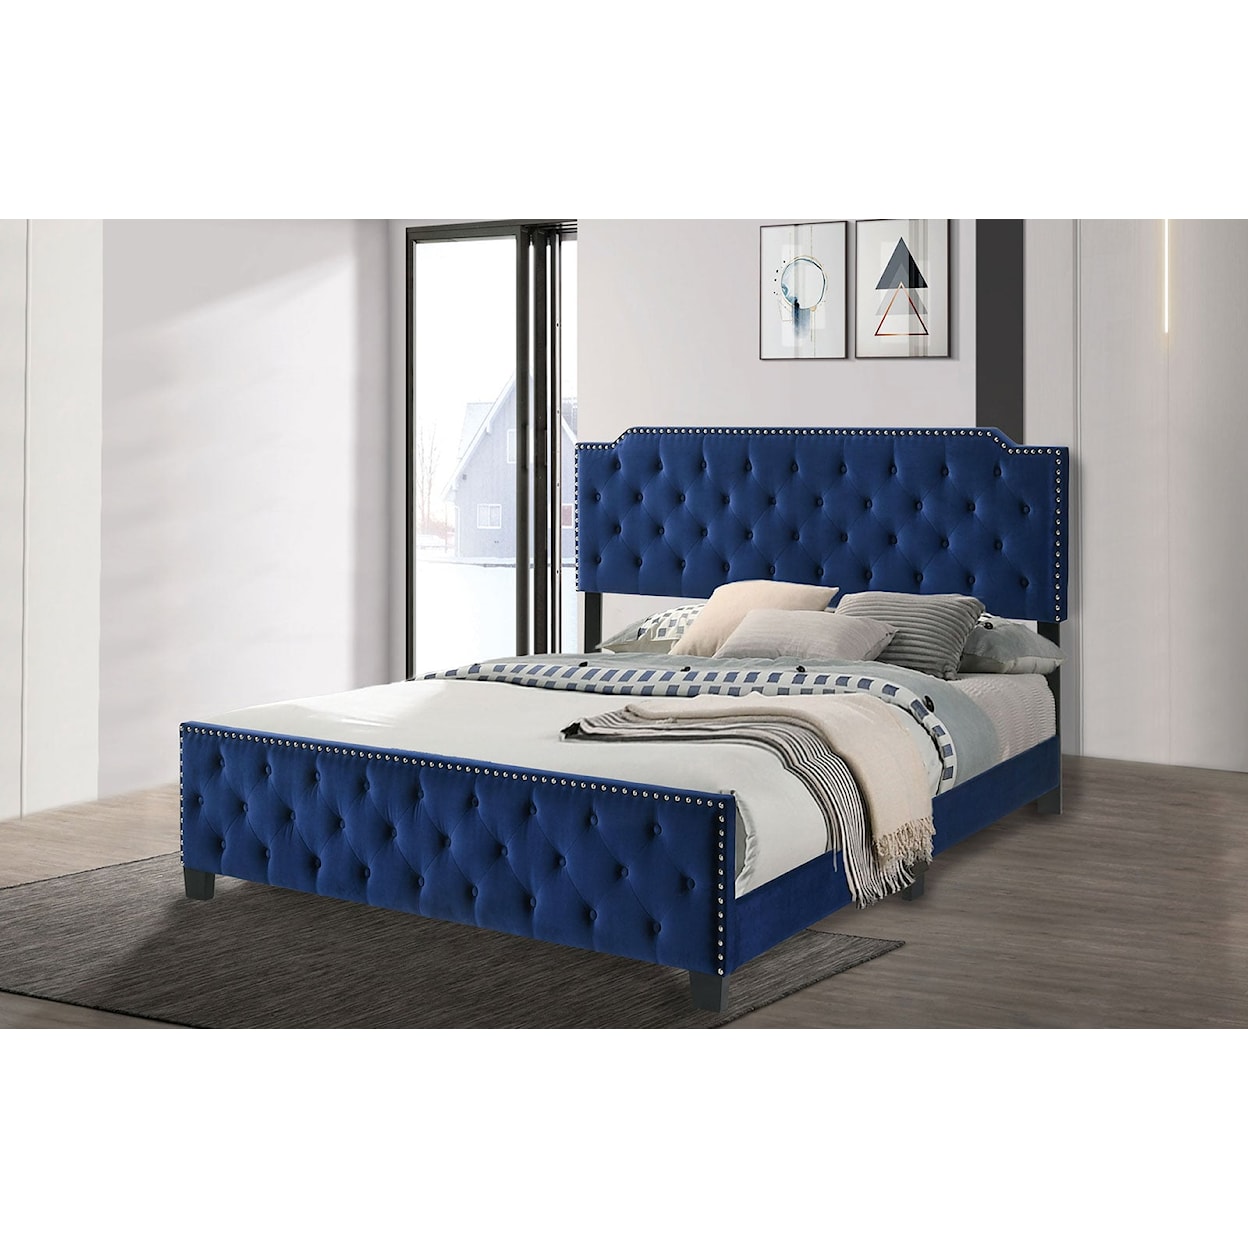 Furniture of America Charlize California King Bed